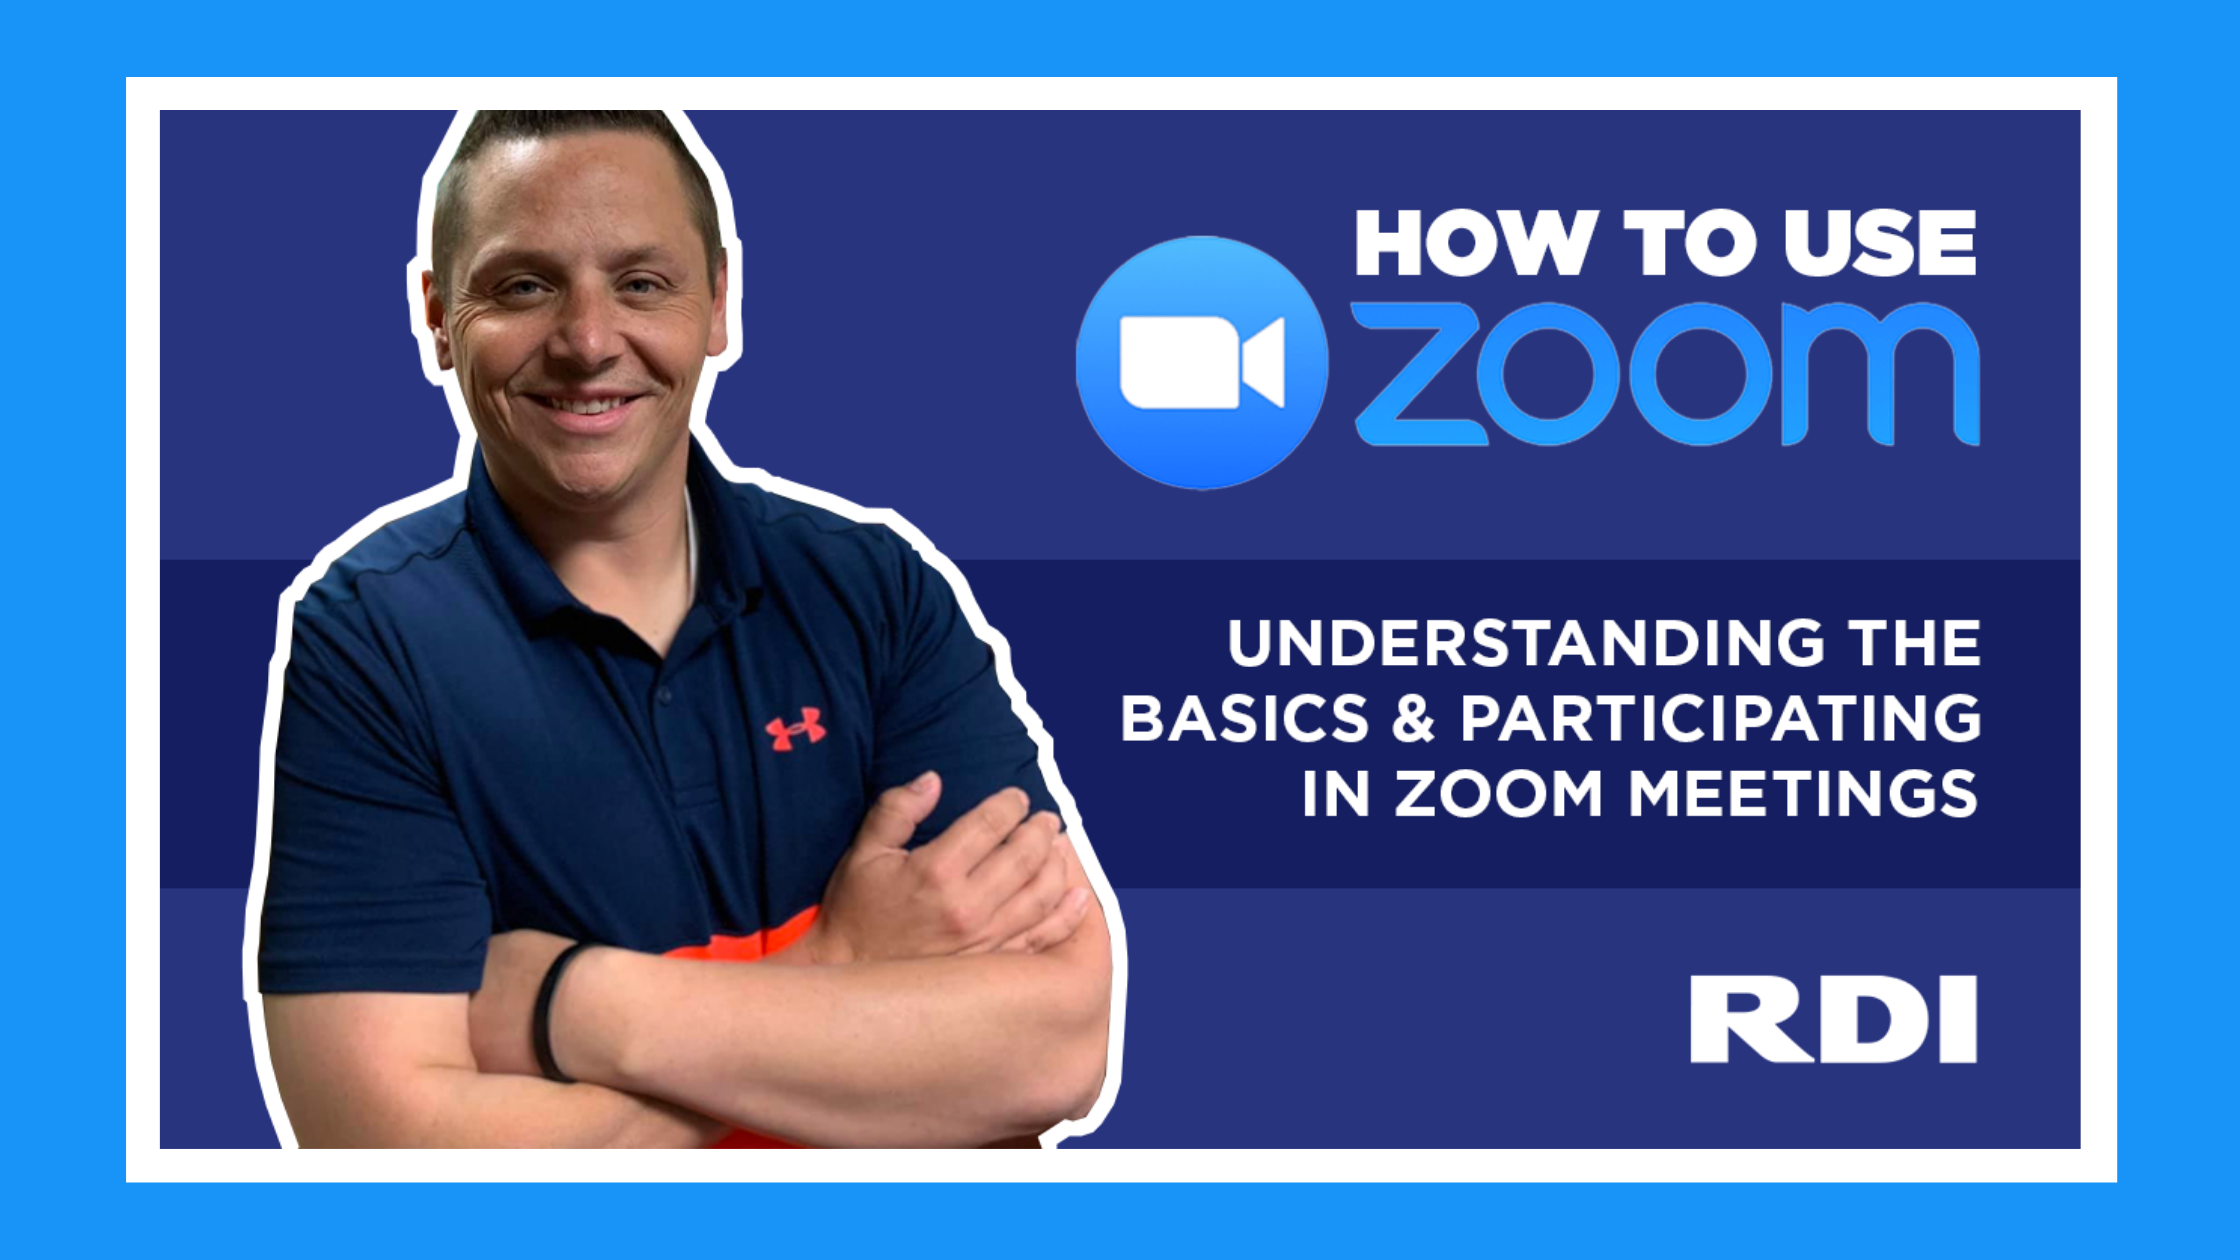 How to Use Zoom - The Basics and Participating in Zoom Meetings